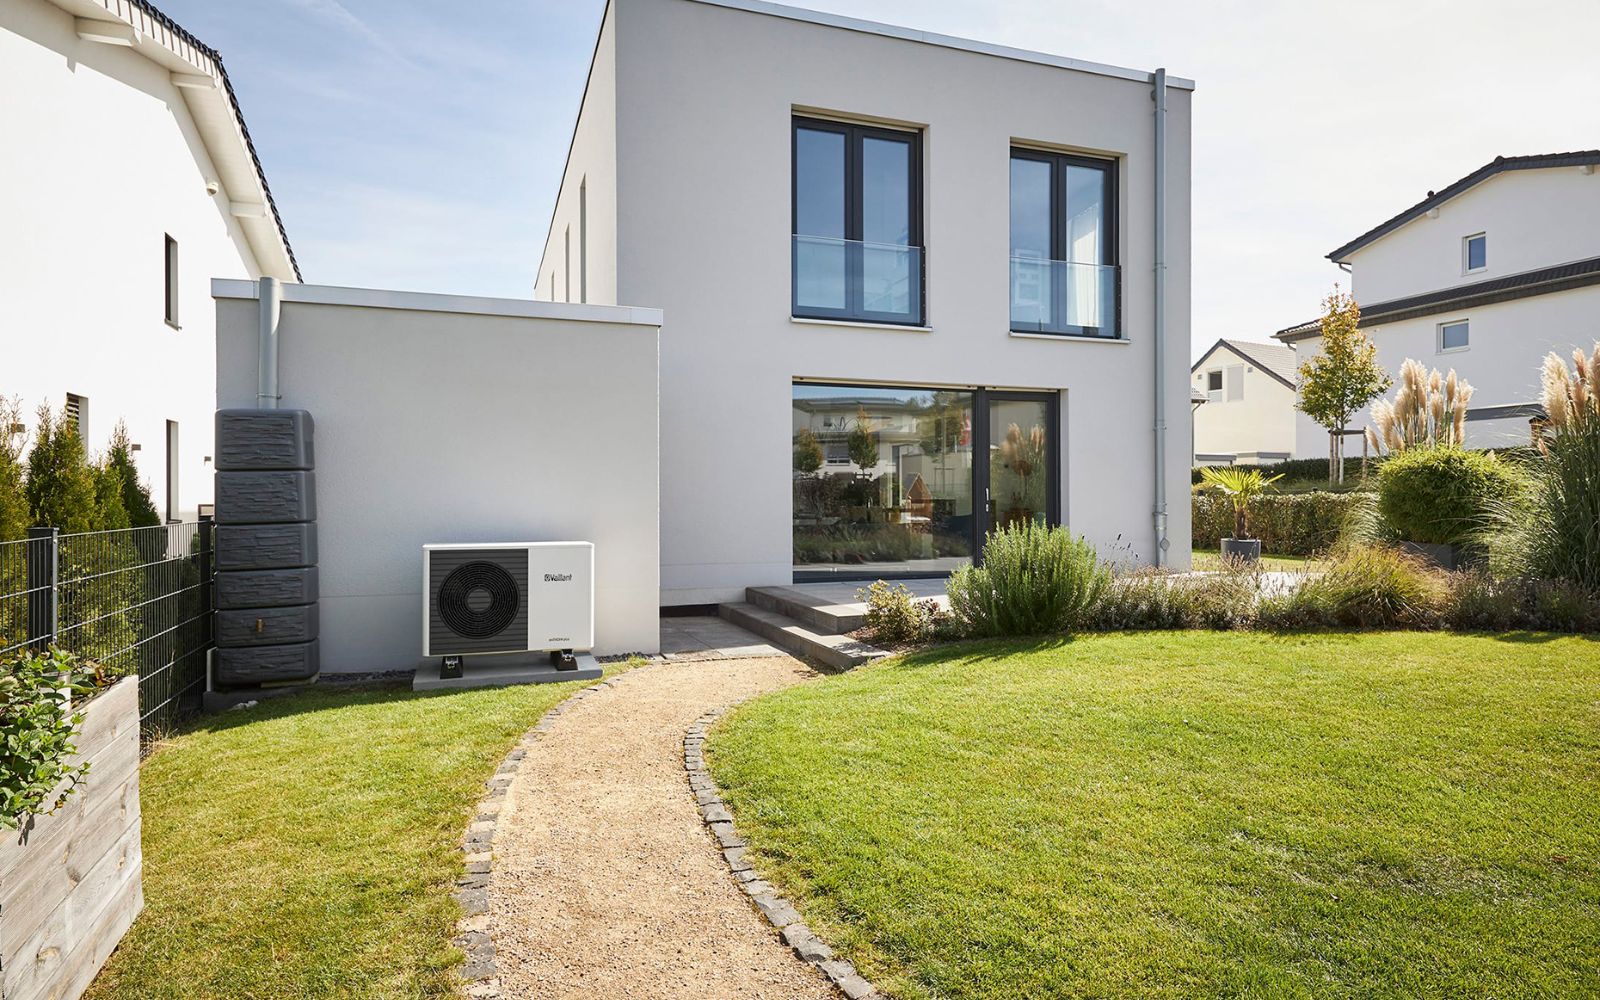 Are heat pumps suitable for UK homes